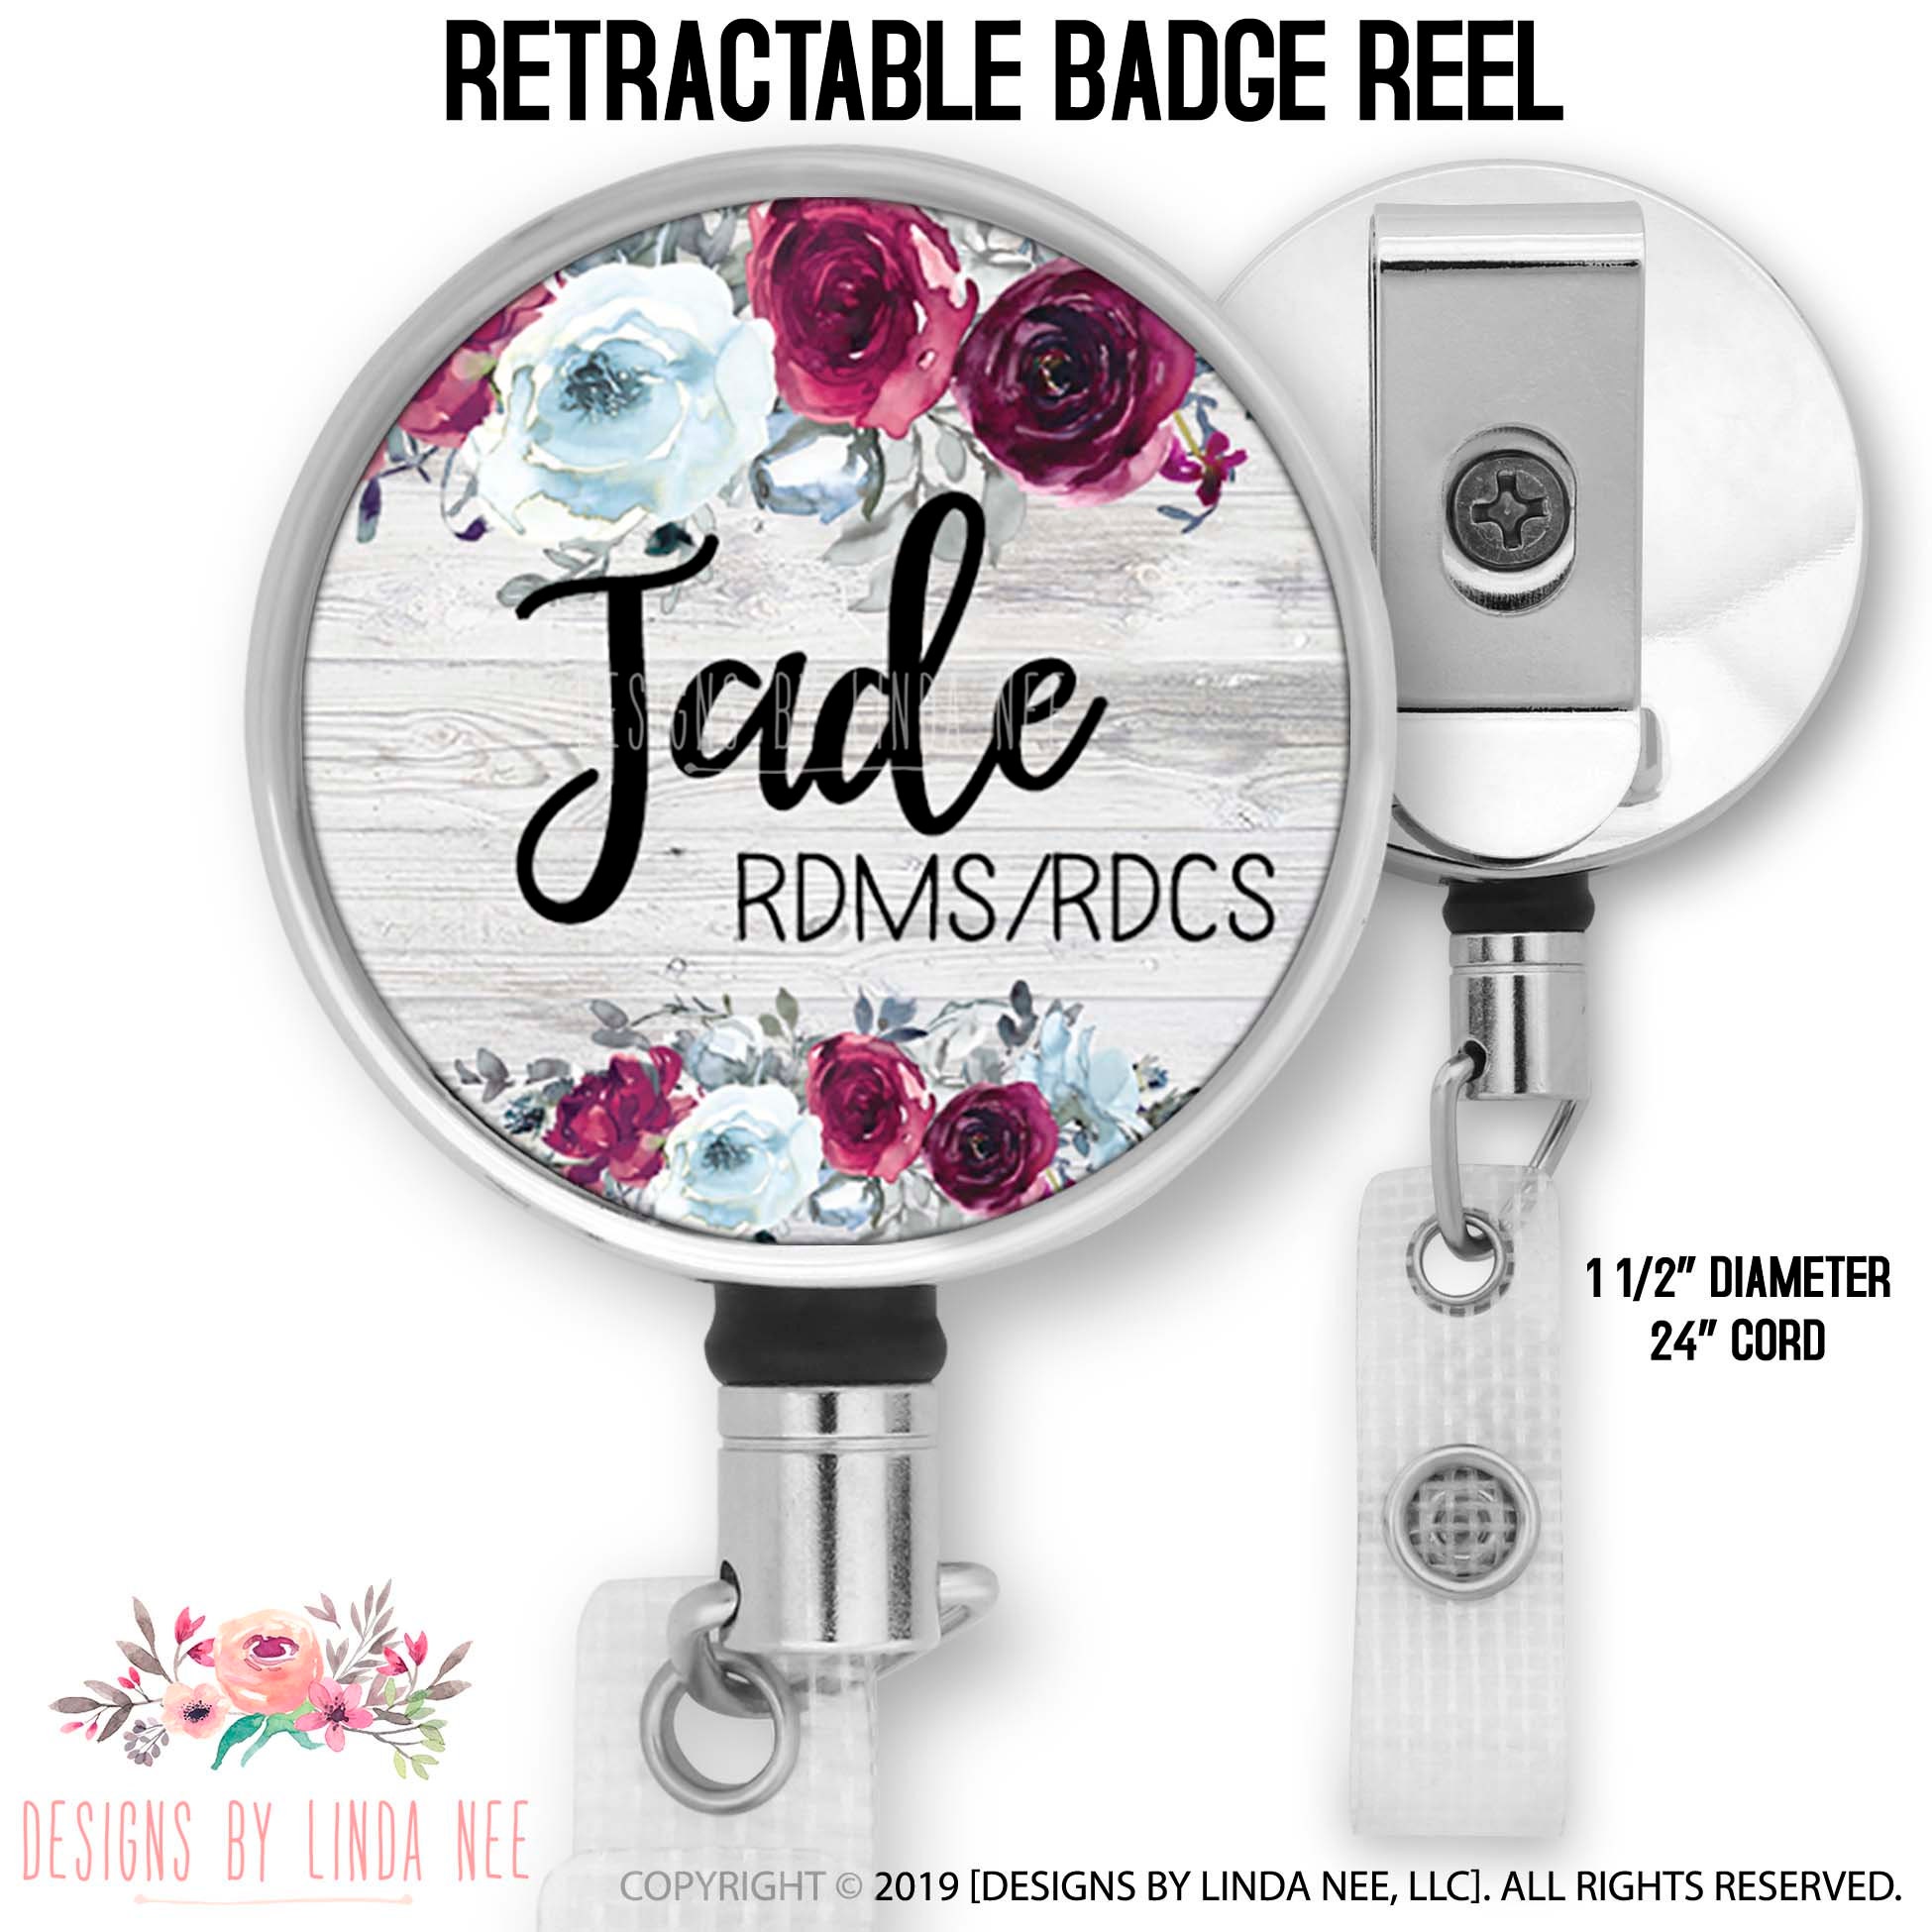 Medical Sonographer Personalized Retractable Badge Reel Medical Badge Reel Nurse Badge ID OB/GYN Rn BSN Dental Assistant CDA RDA Cam BRP22